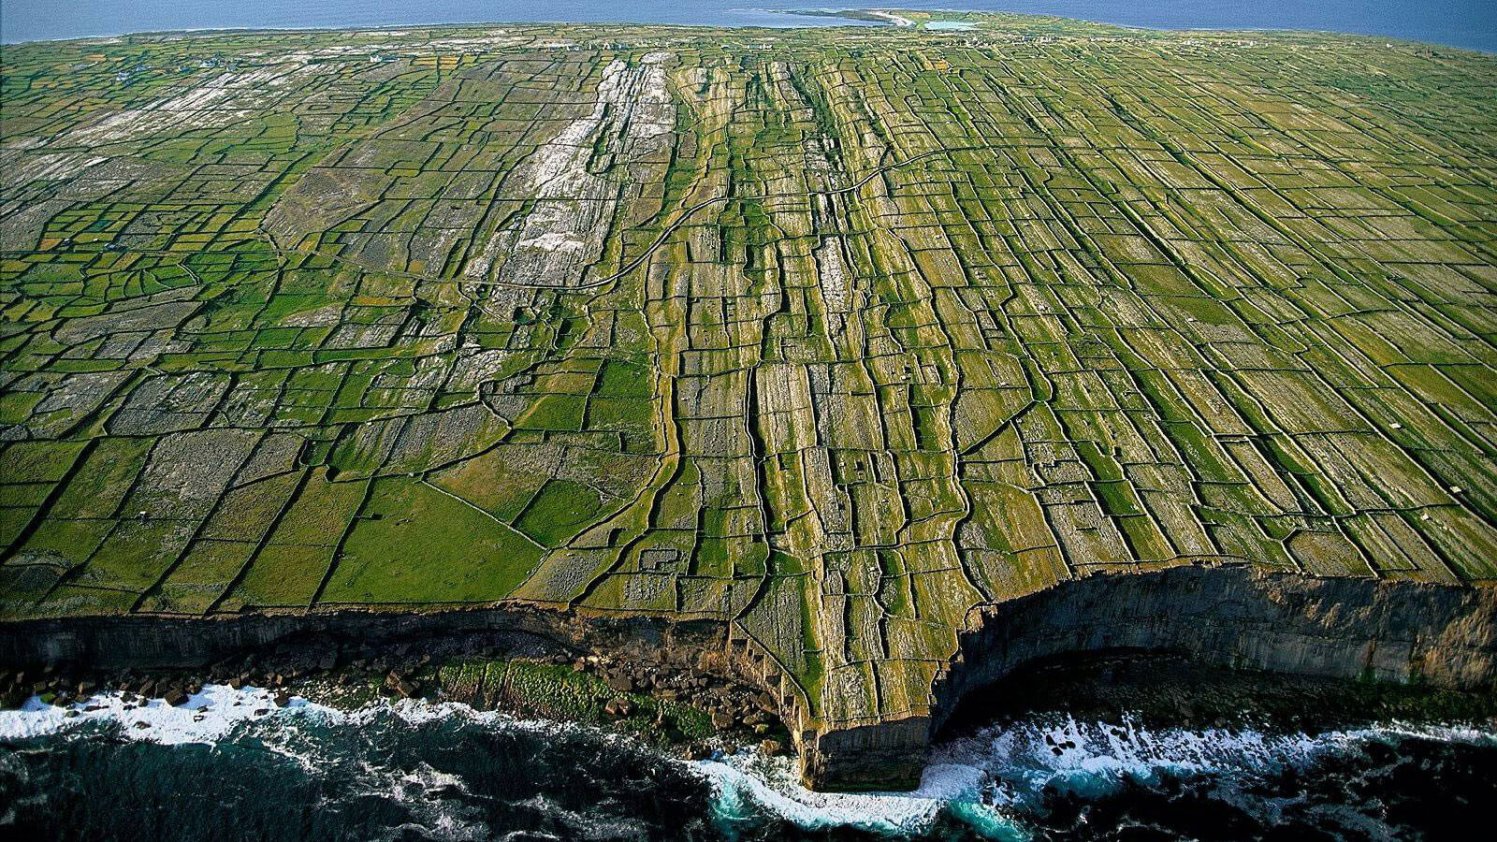 Aerial view of patchwork fields and dry stone walls on one of the Aran islands, Ireland